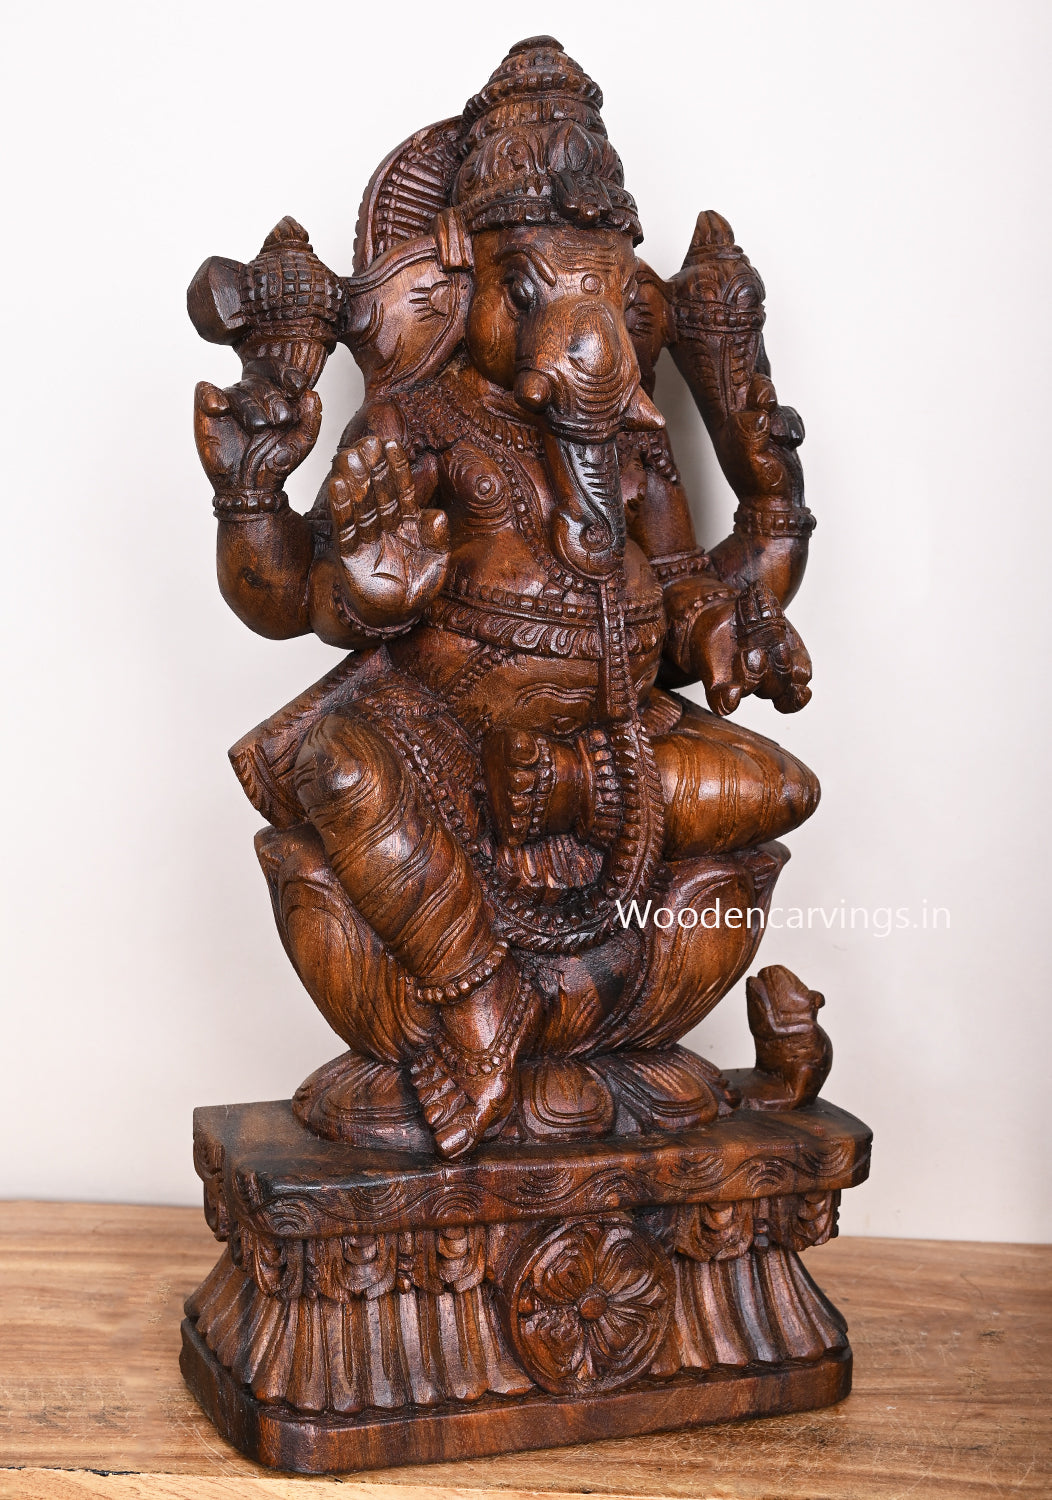 Blessing Preety Lord Ganapathy Seated on Petal Lotus With Base Wooden Wax Brown Home Decor Sculpture 24"